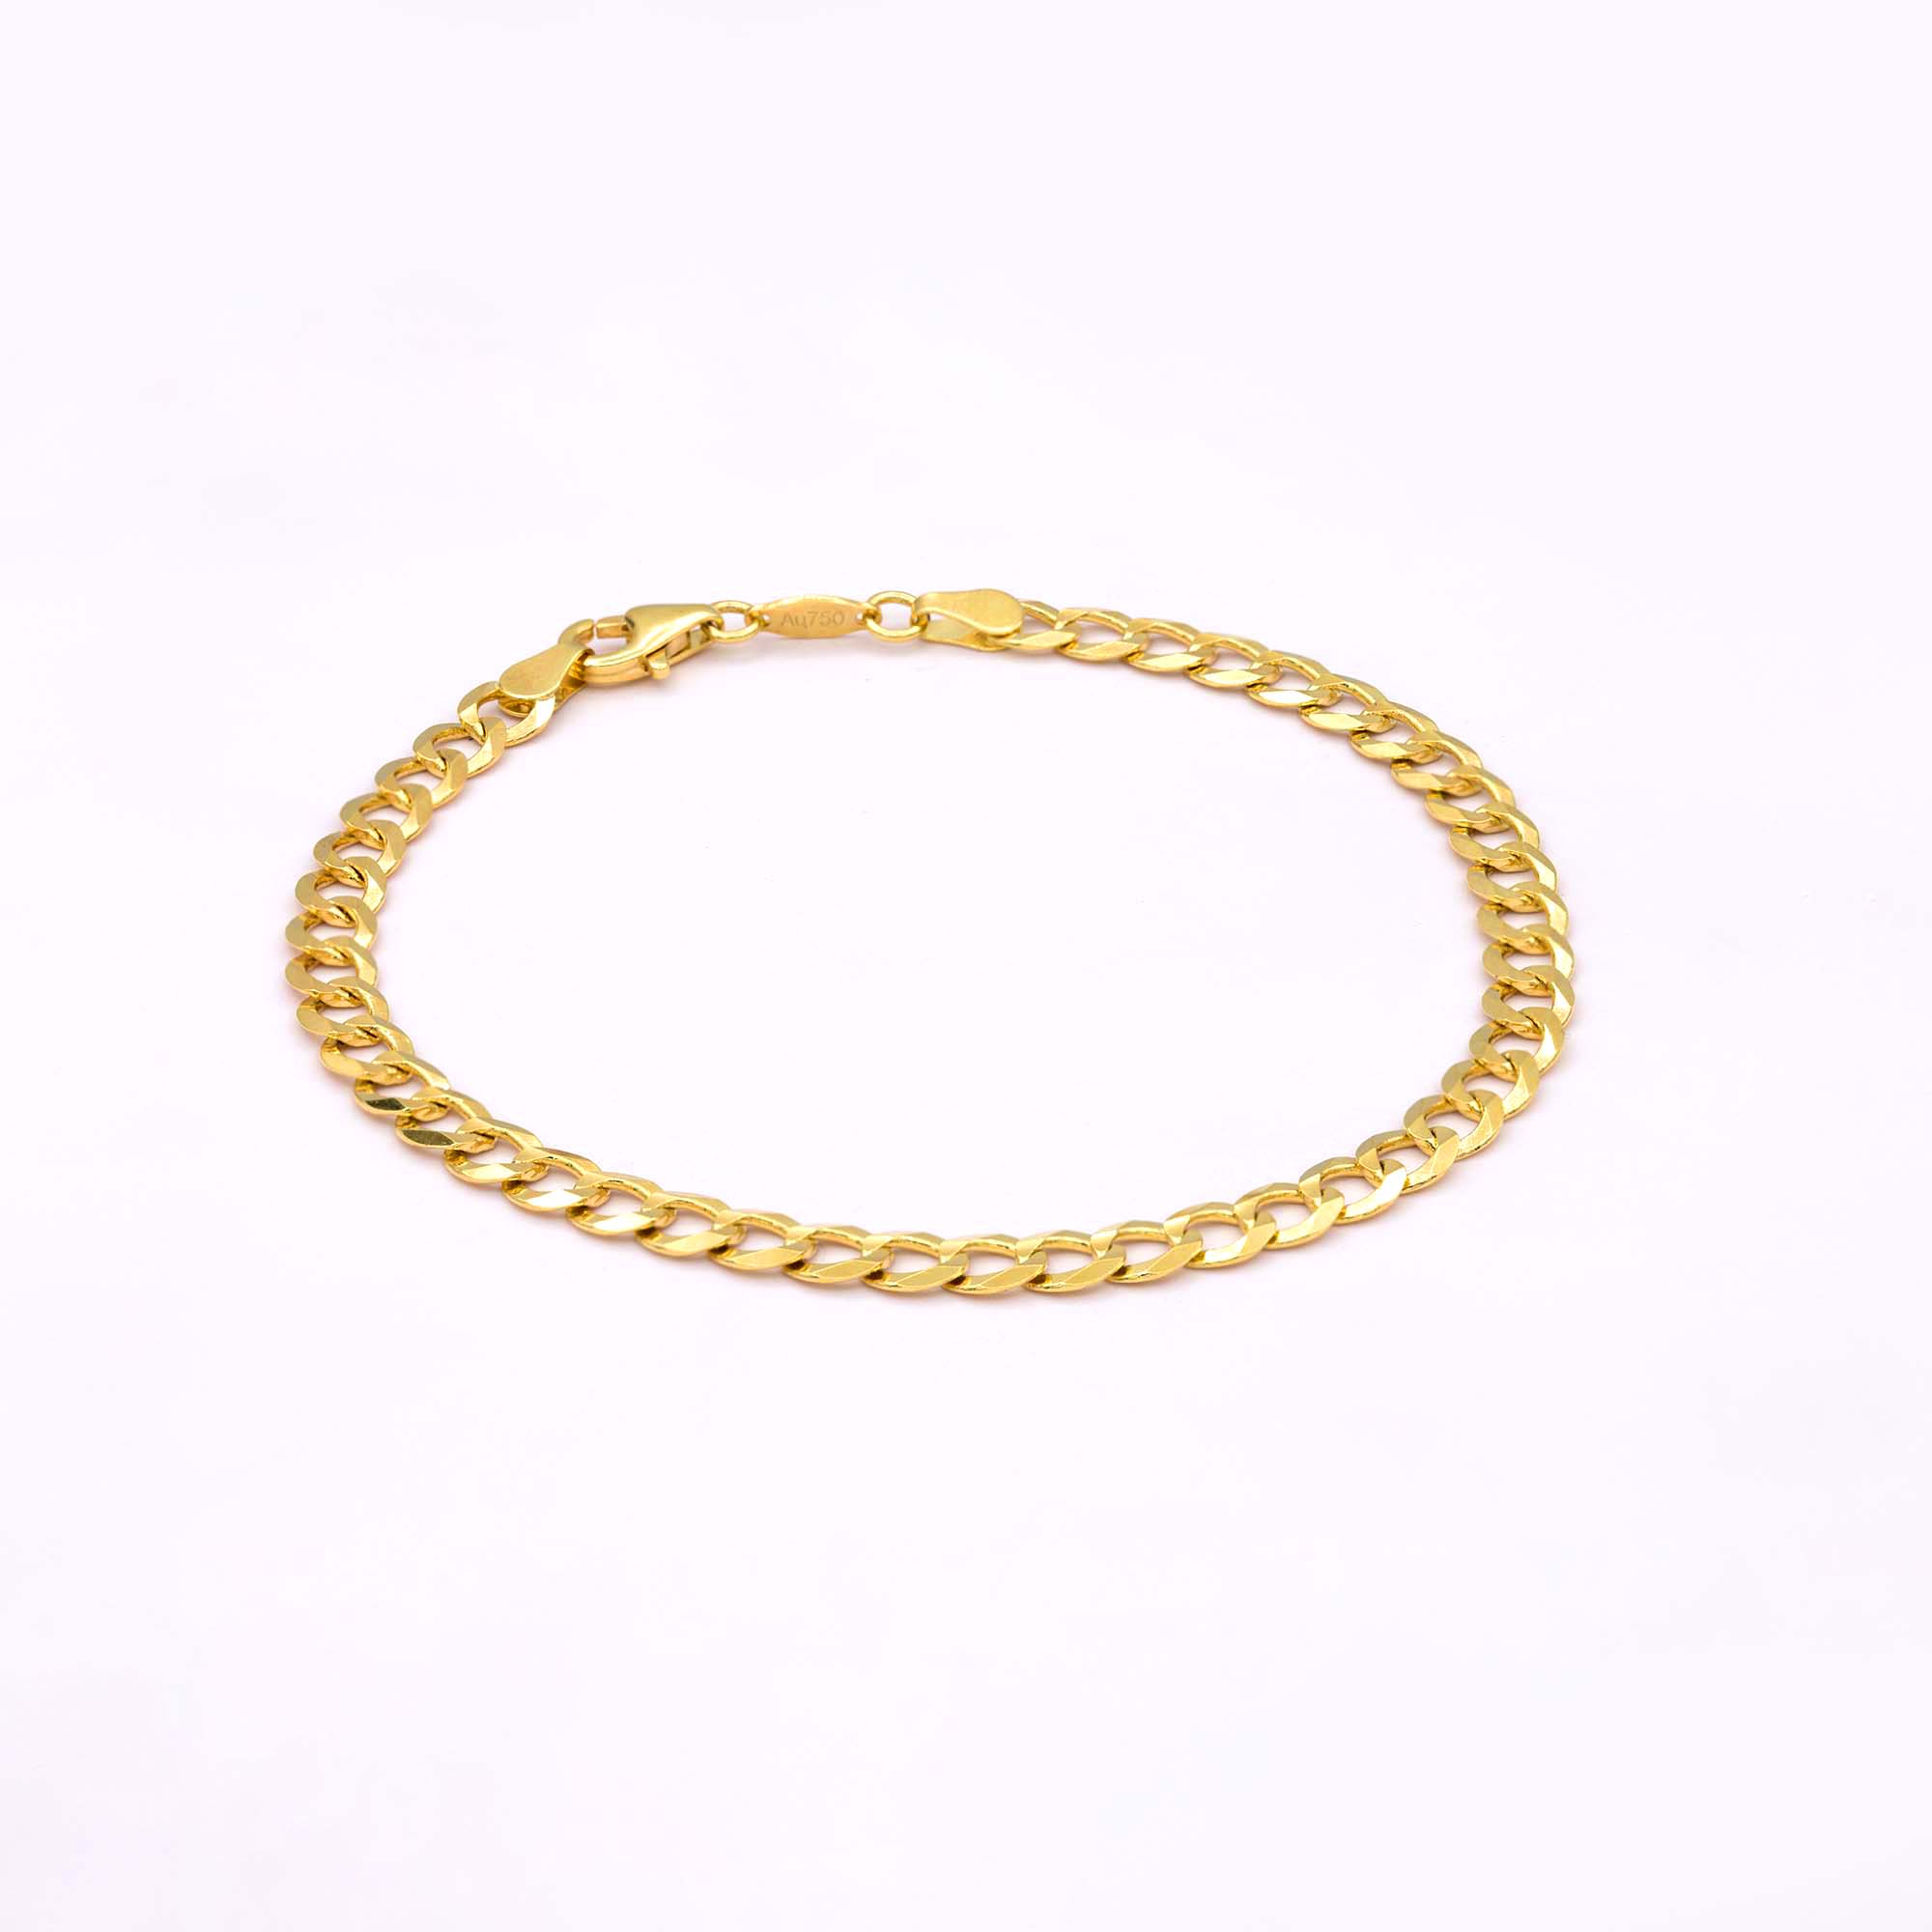 Elegant Big Thick Chain Link Bracelets for Women Gold Color Female Wrist  Jewelry